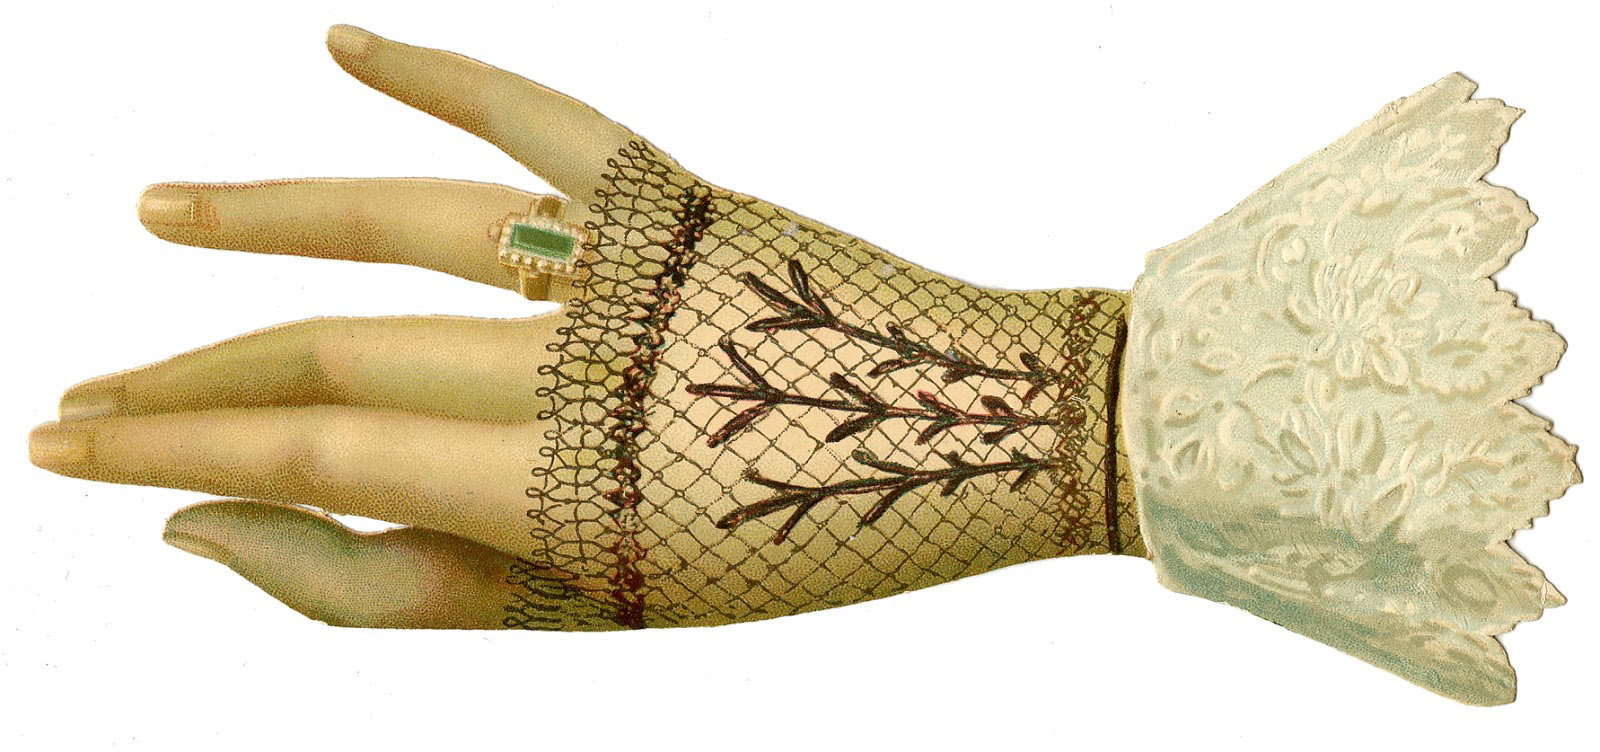 Ladies Hand with Glove Image